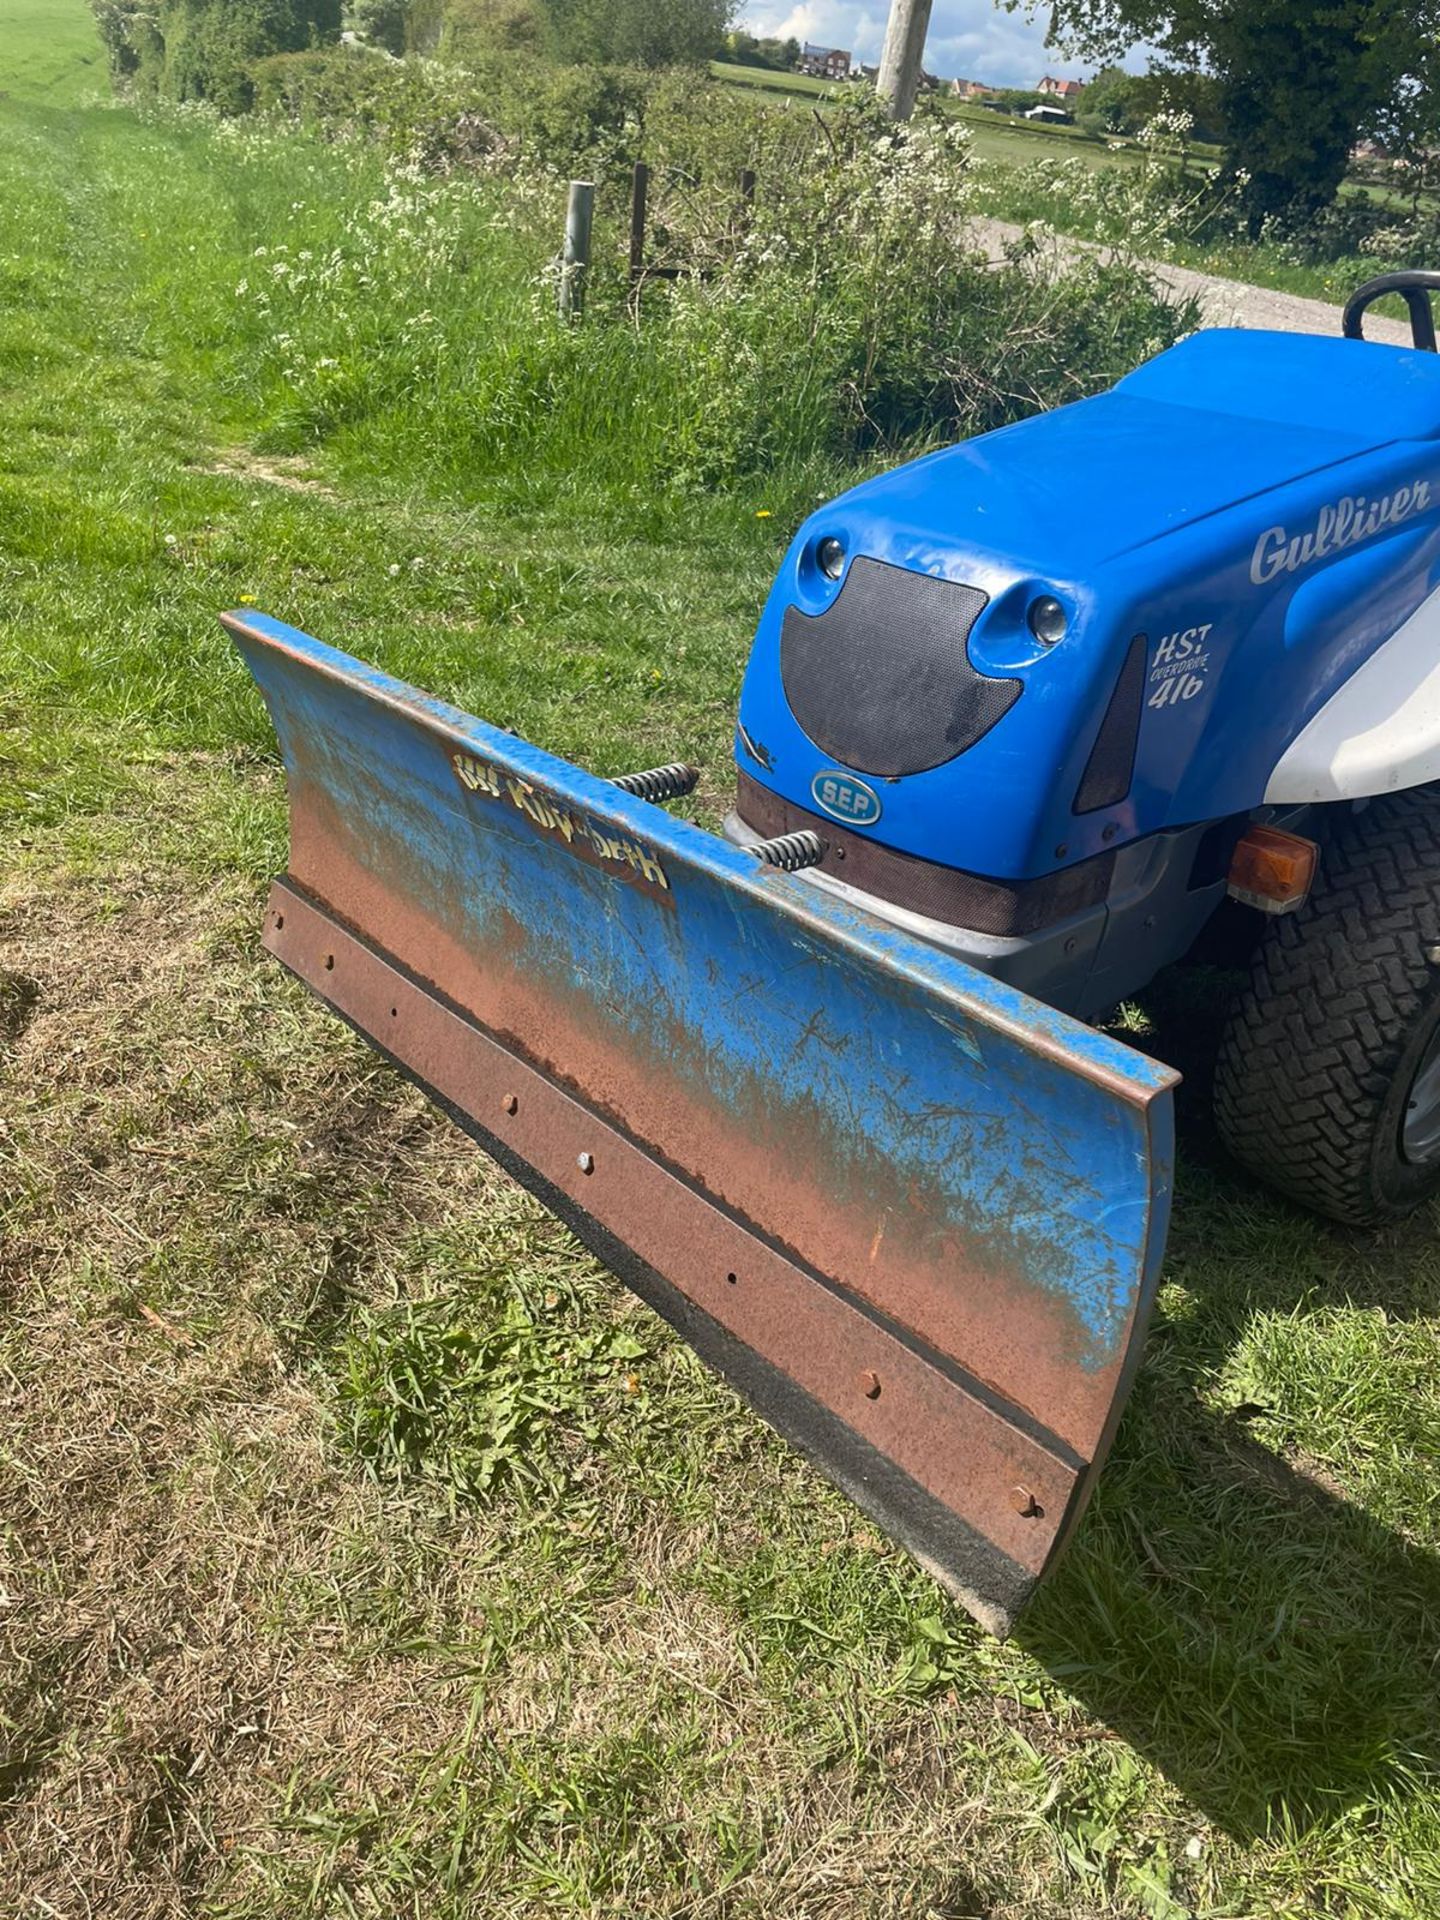 S E P GULLIVER OVERDRIVE 416 COMPACT TRACTOR WITH FRONT SNOW PLOUGH, ROLL BAR *PLUS VAT* - Image 11 of 14